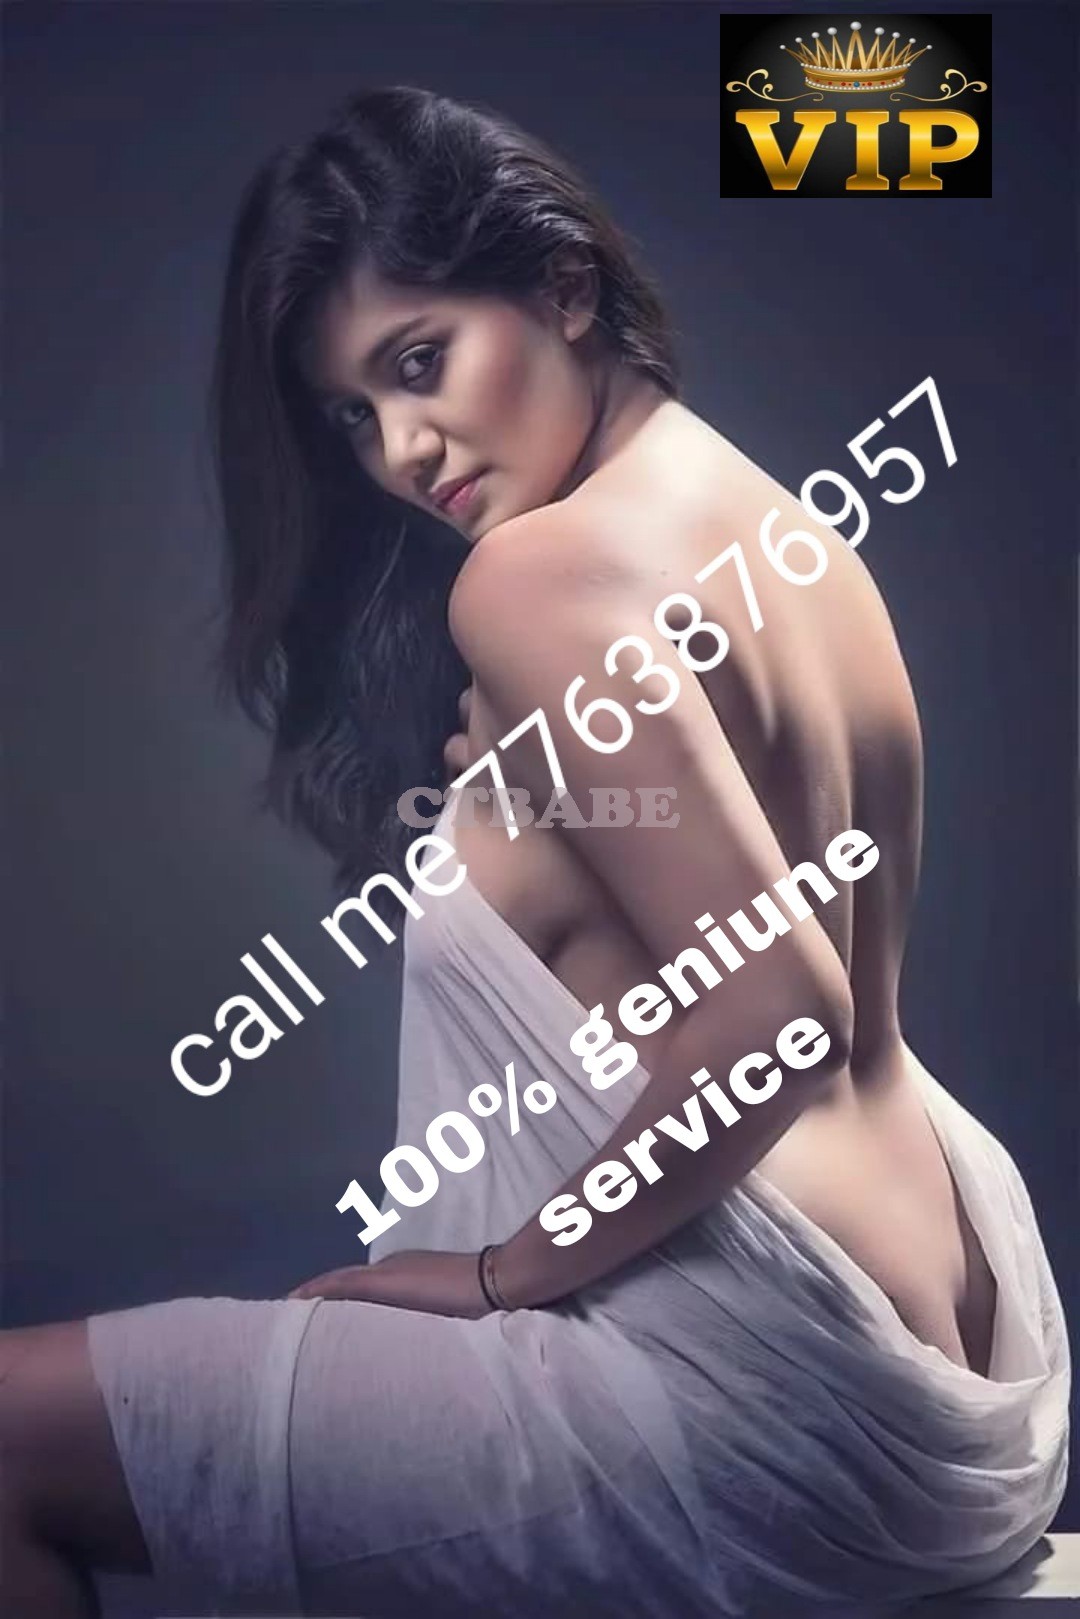 CALANGUTE BEACH CALL GIRL 74399*45651 LOW PRICE CASH PAYMENT FULL SAFE & SECURE 